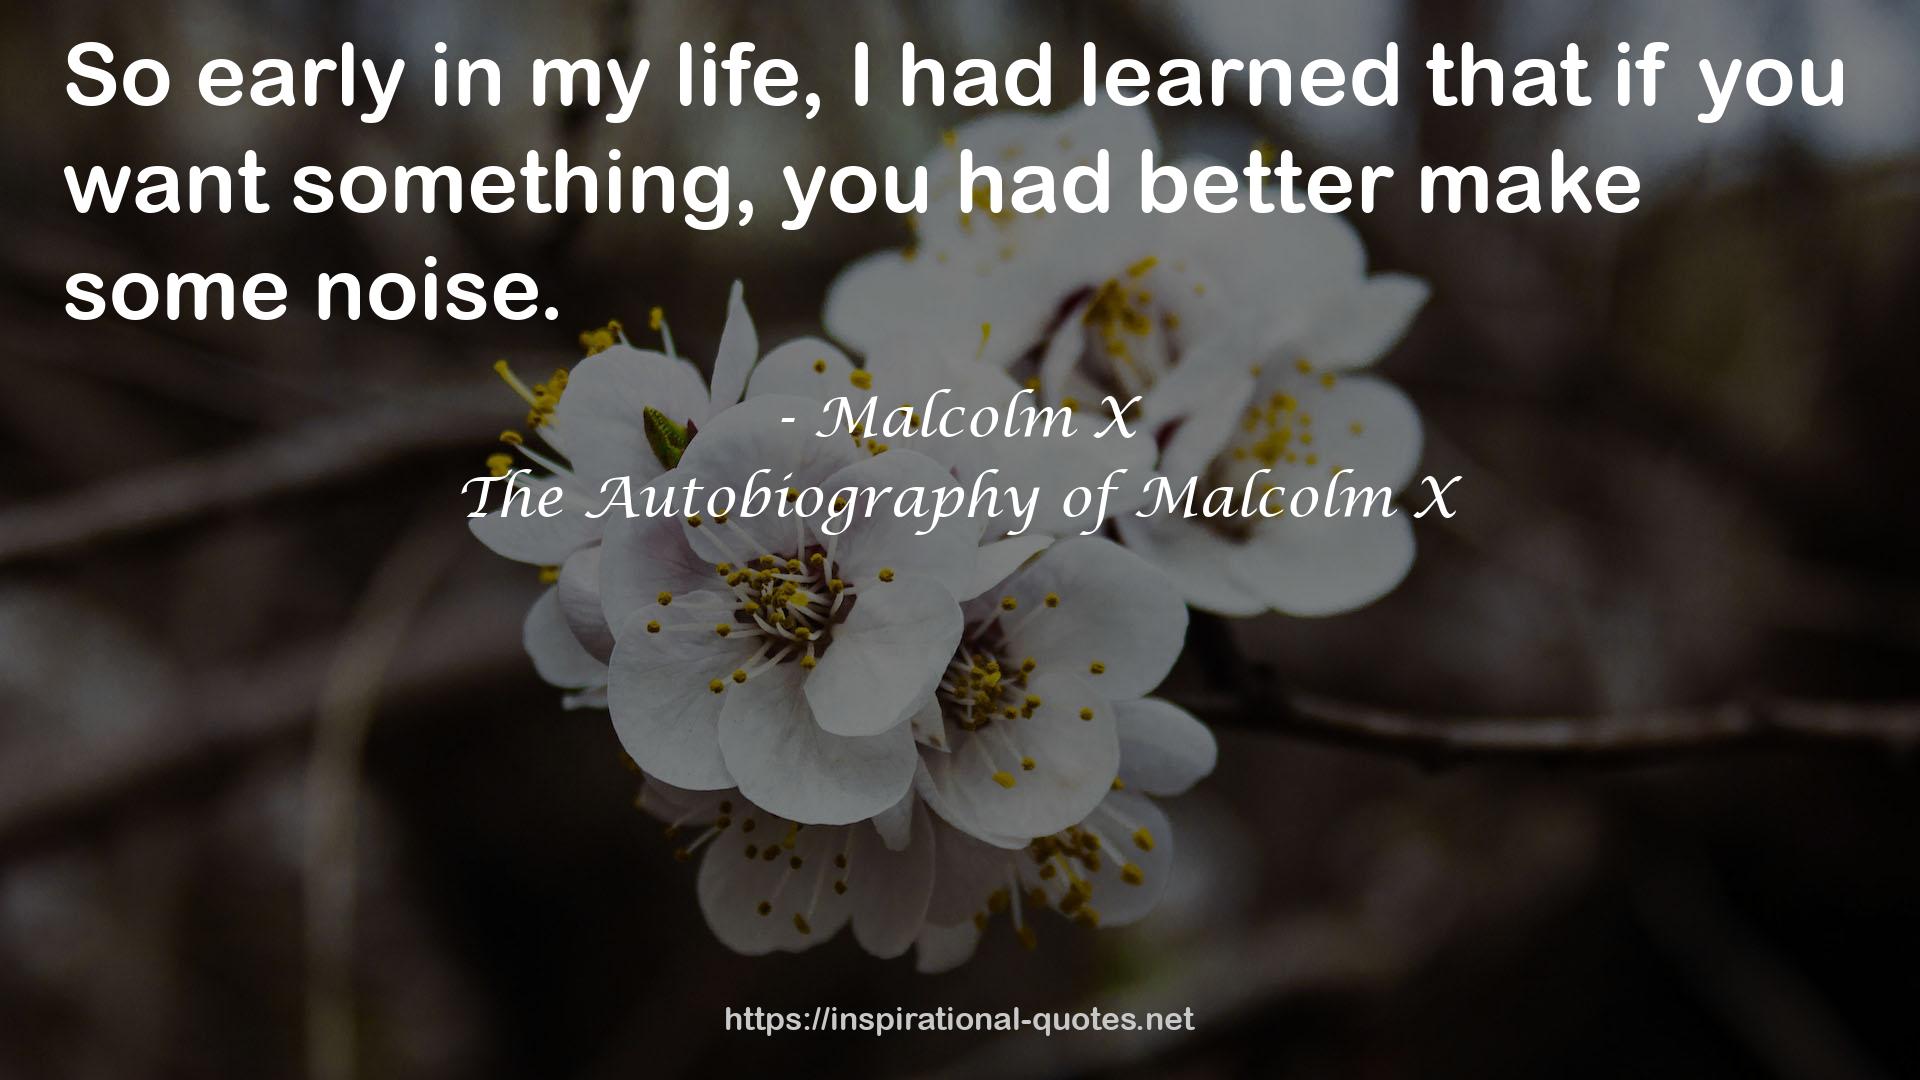 The Autobiography of Malcolm X QUOTES